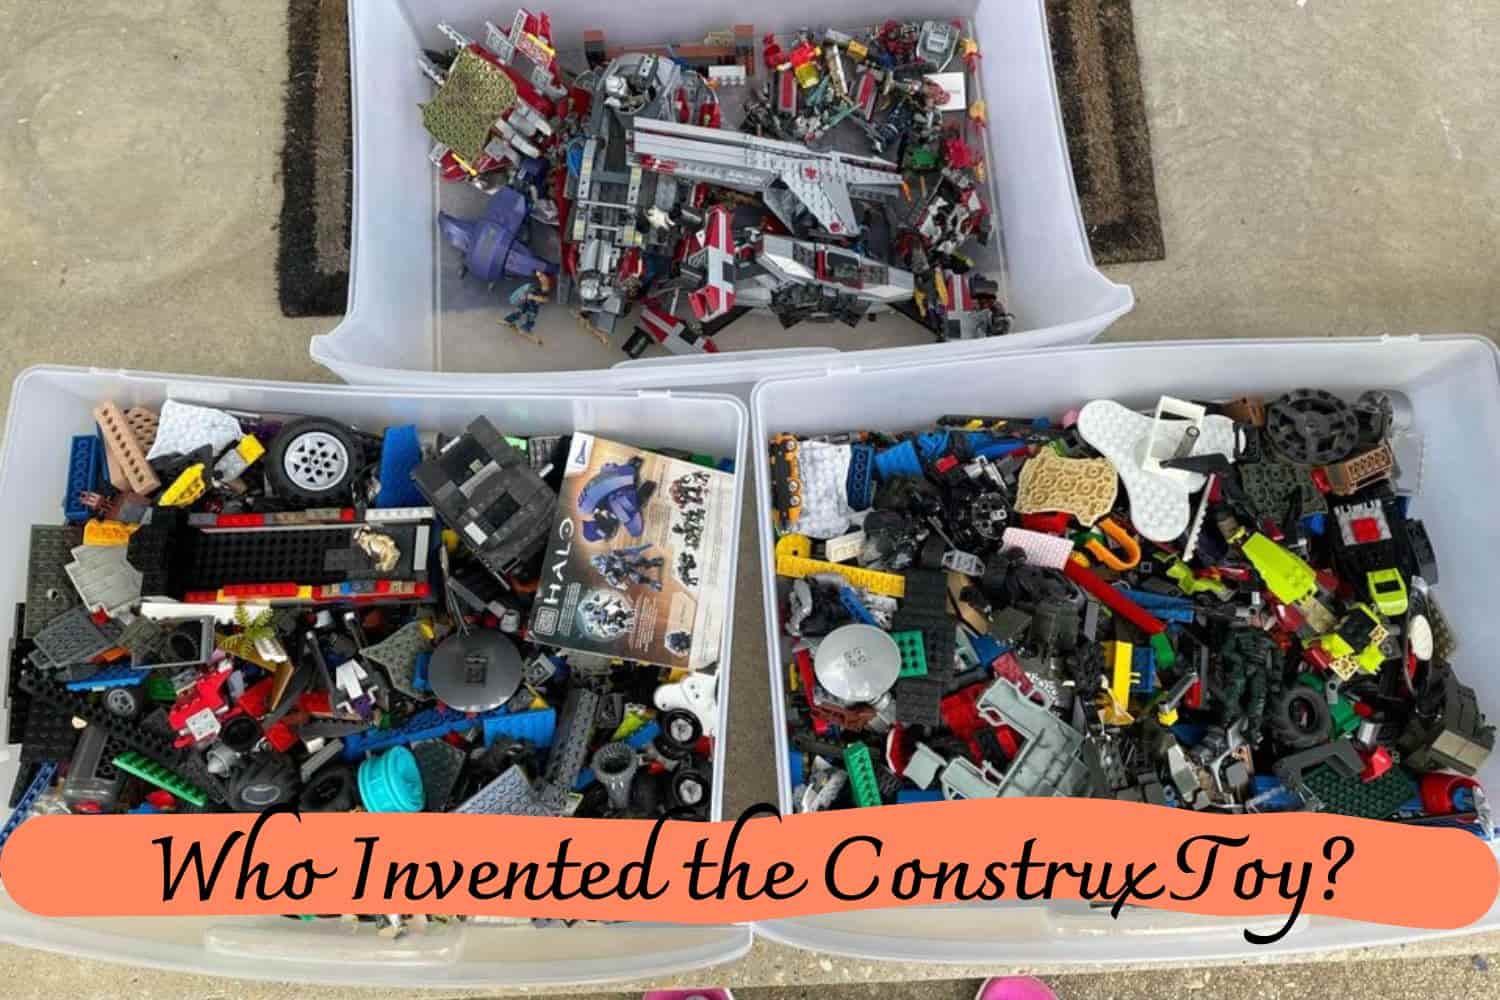 Who Invented the Construx Toy